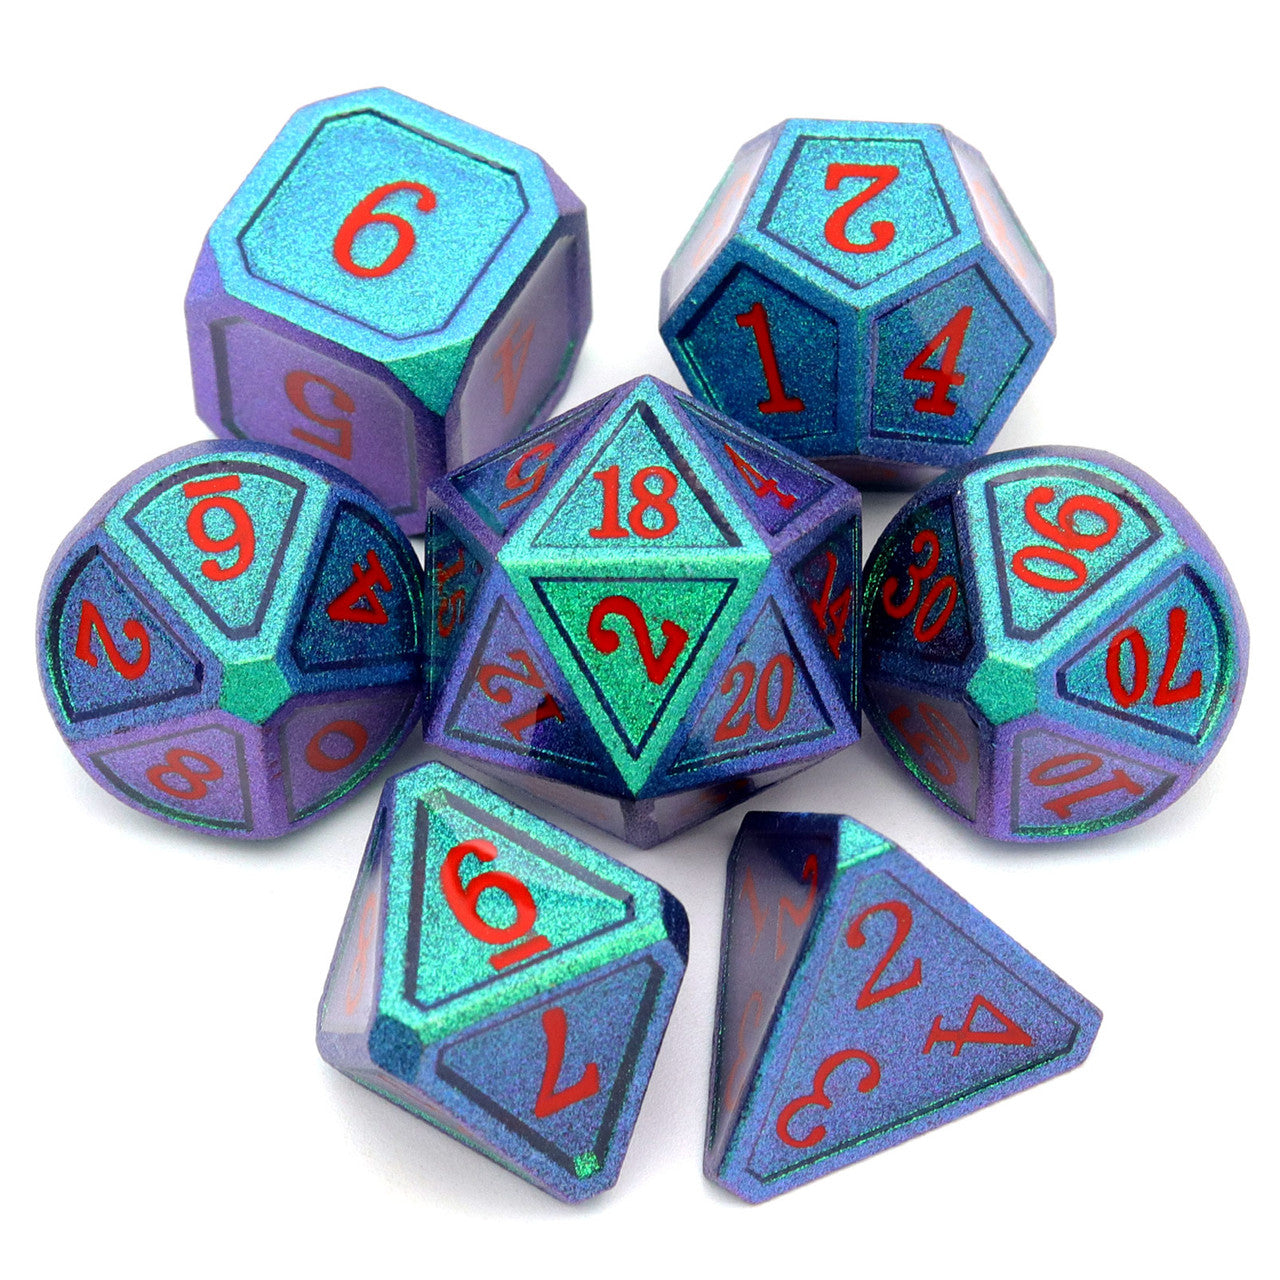 Haxtec Chameleon Metal DND Dice Color Changing Dice-Noble Green Purple Shift Red Numbers